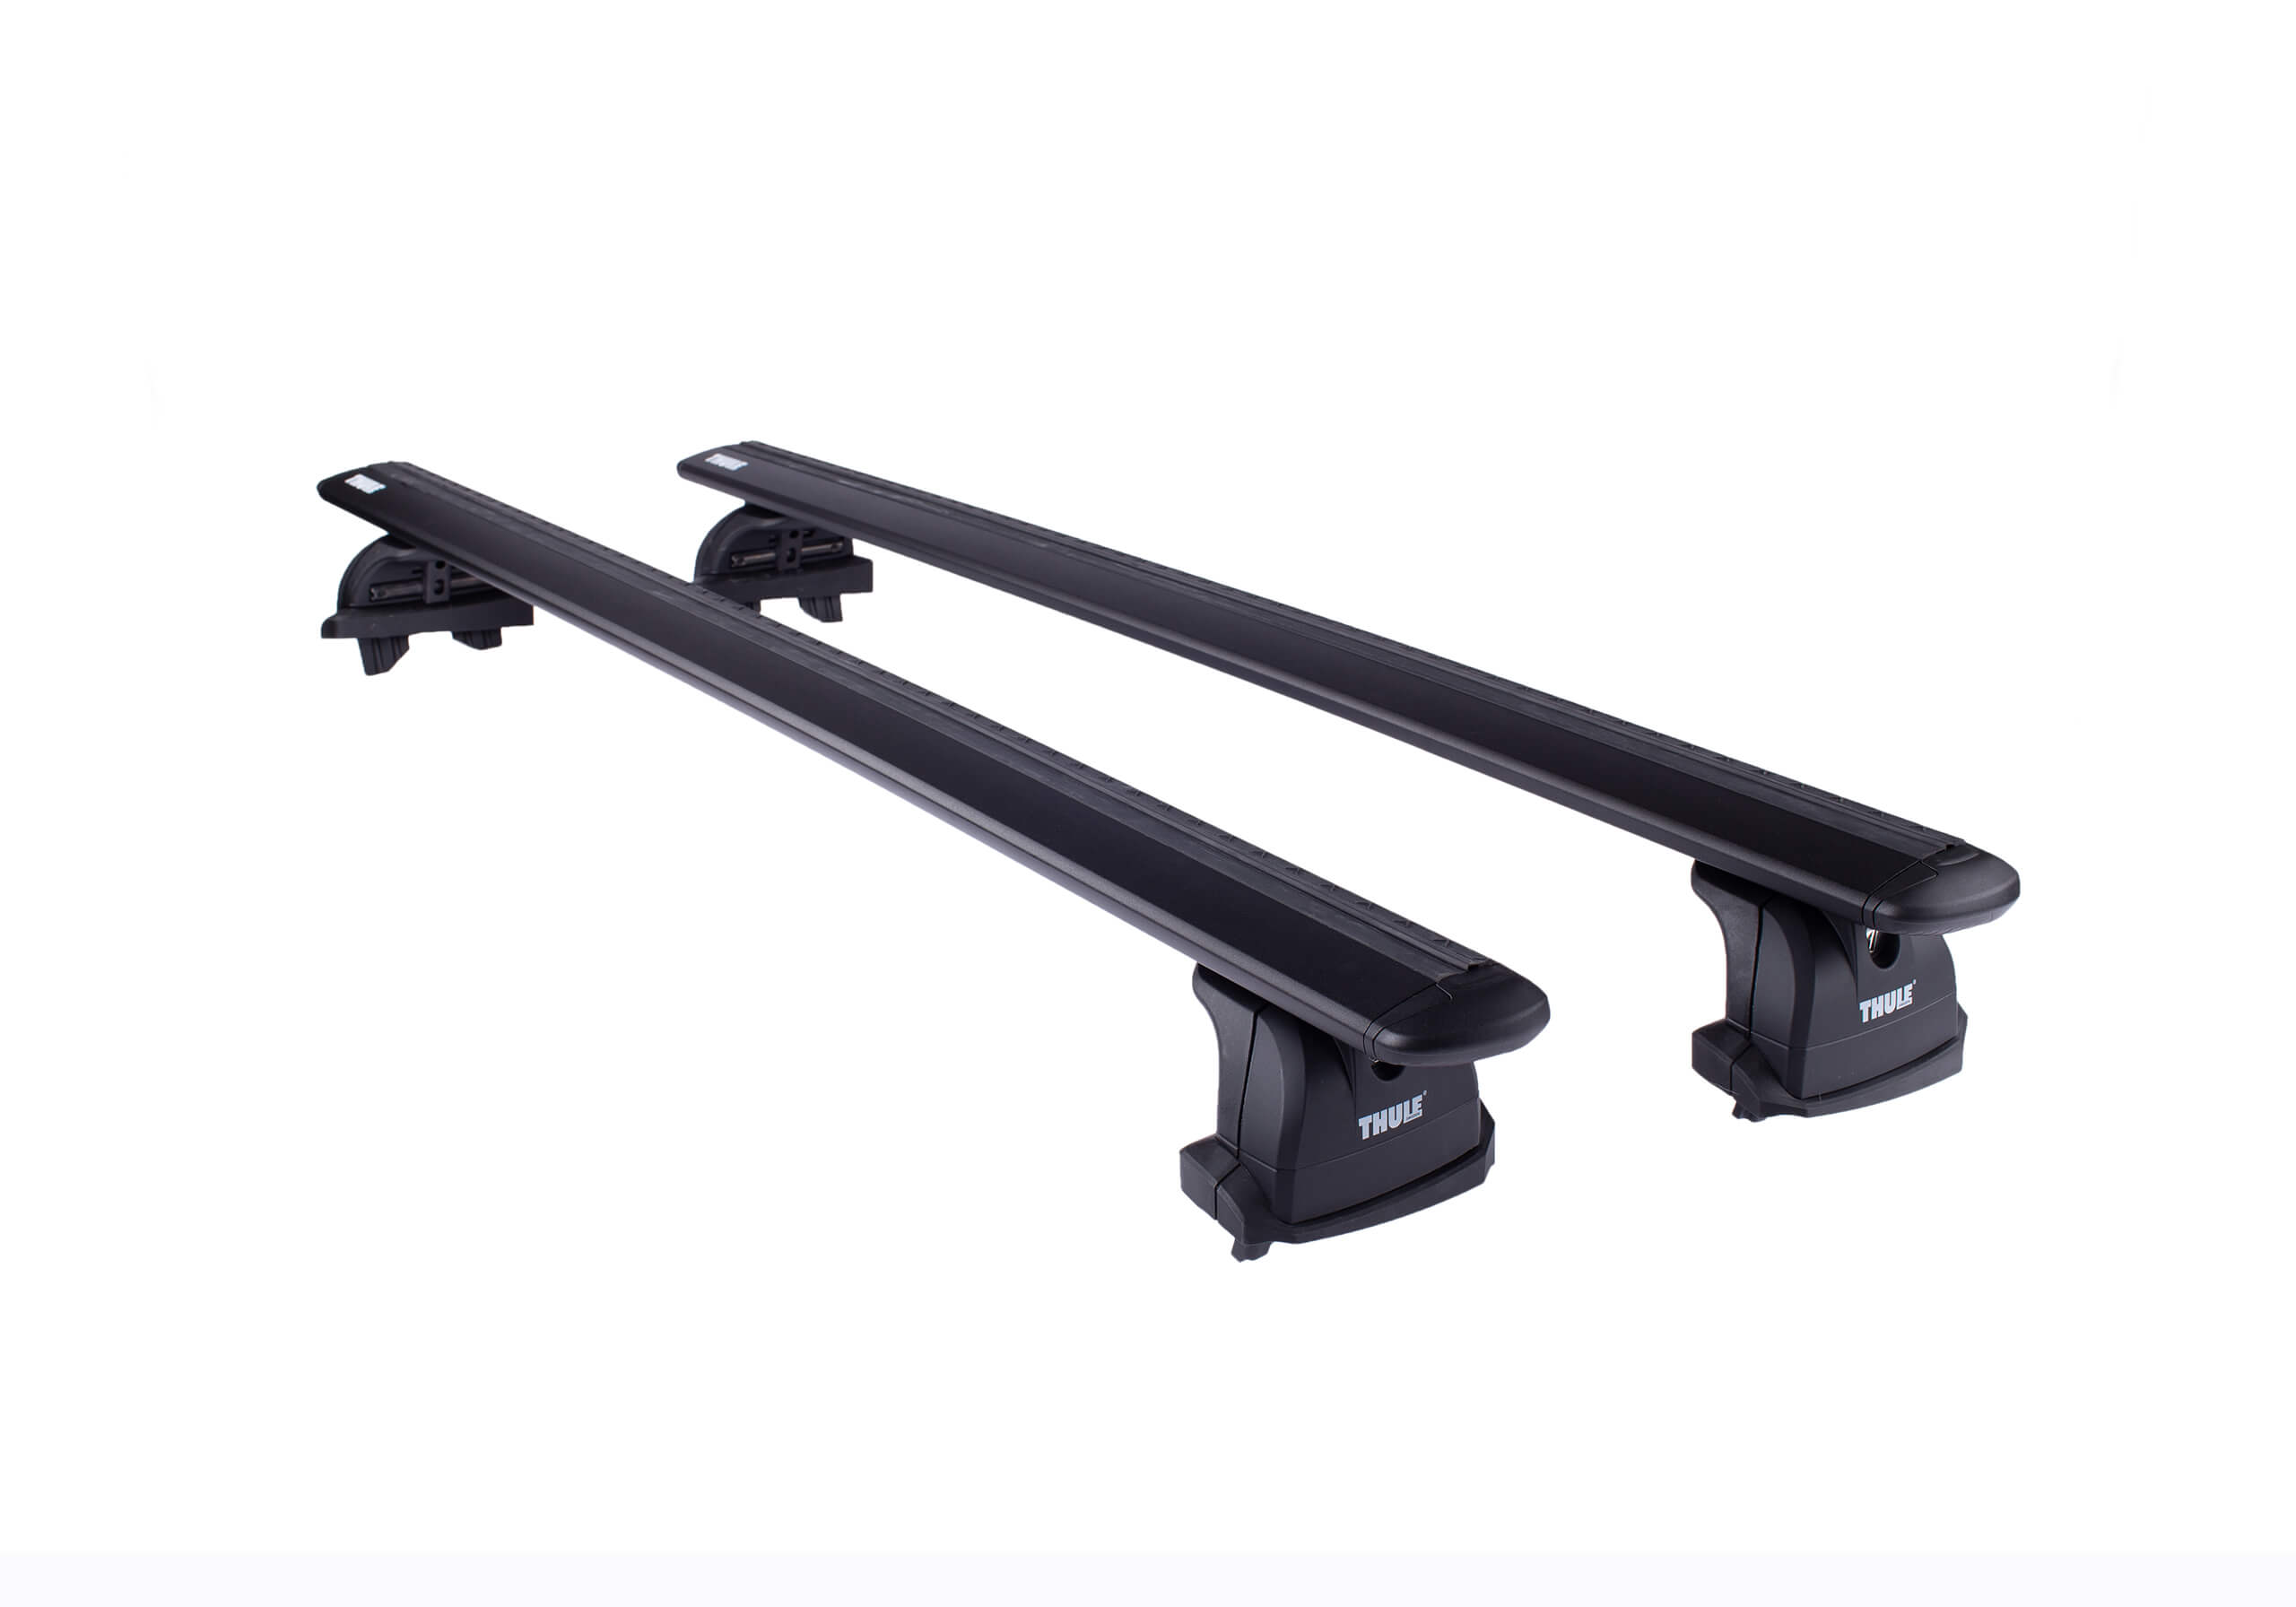 BMW 3 series coupe (2002 to 2006):Thule black WingBars package - 753, 7111B, 3065